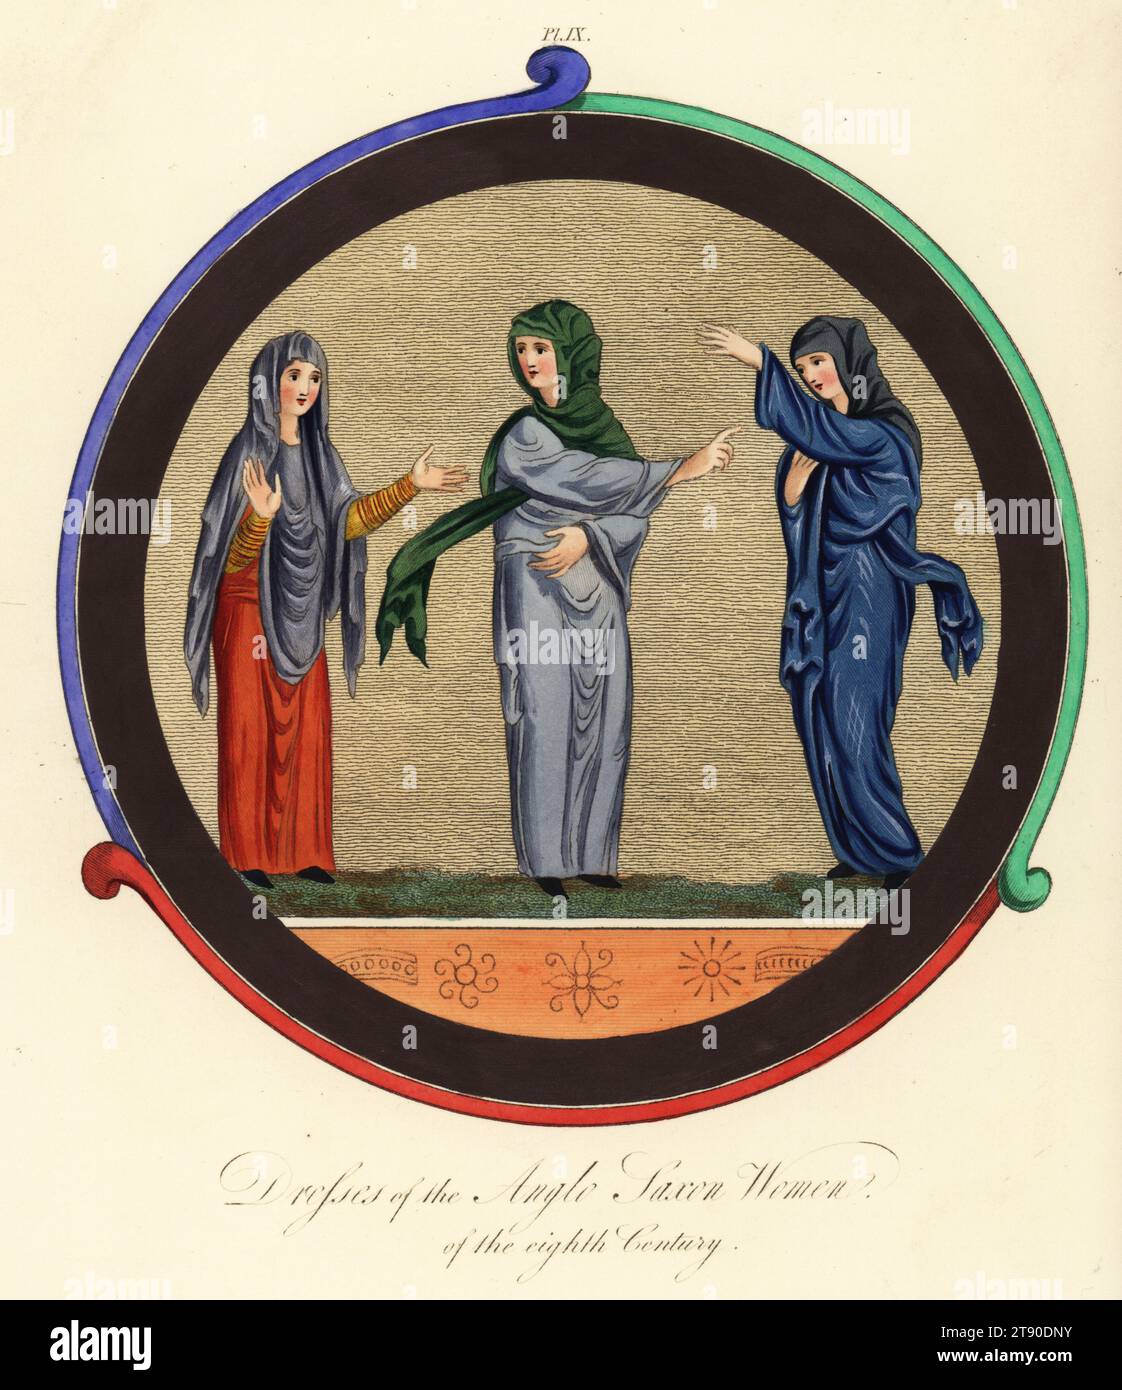 Dresses of Anglo-Saxon women of the 8th century. From the illuminated manuscript Hexateuch in Old English, Cotton MS Claudius B IV, f.10r. Handcoloured engraving by Joseph Strutt from his Complete View of the Dress and Habits of the People of England, Henry Bohn, London, 1842. Stock Photo